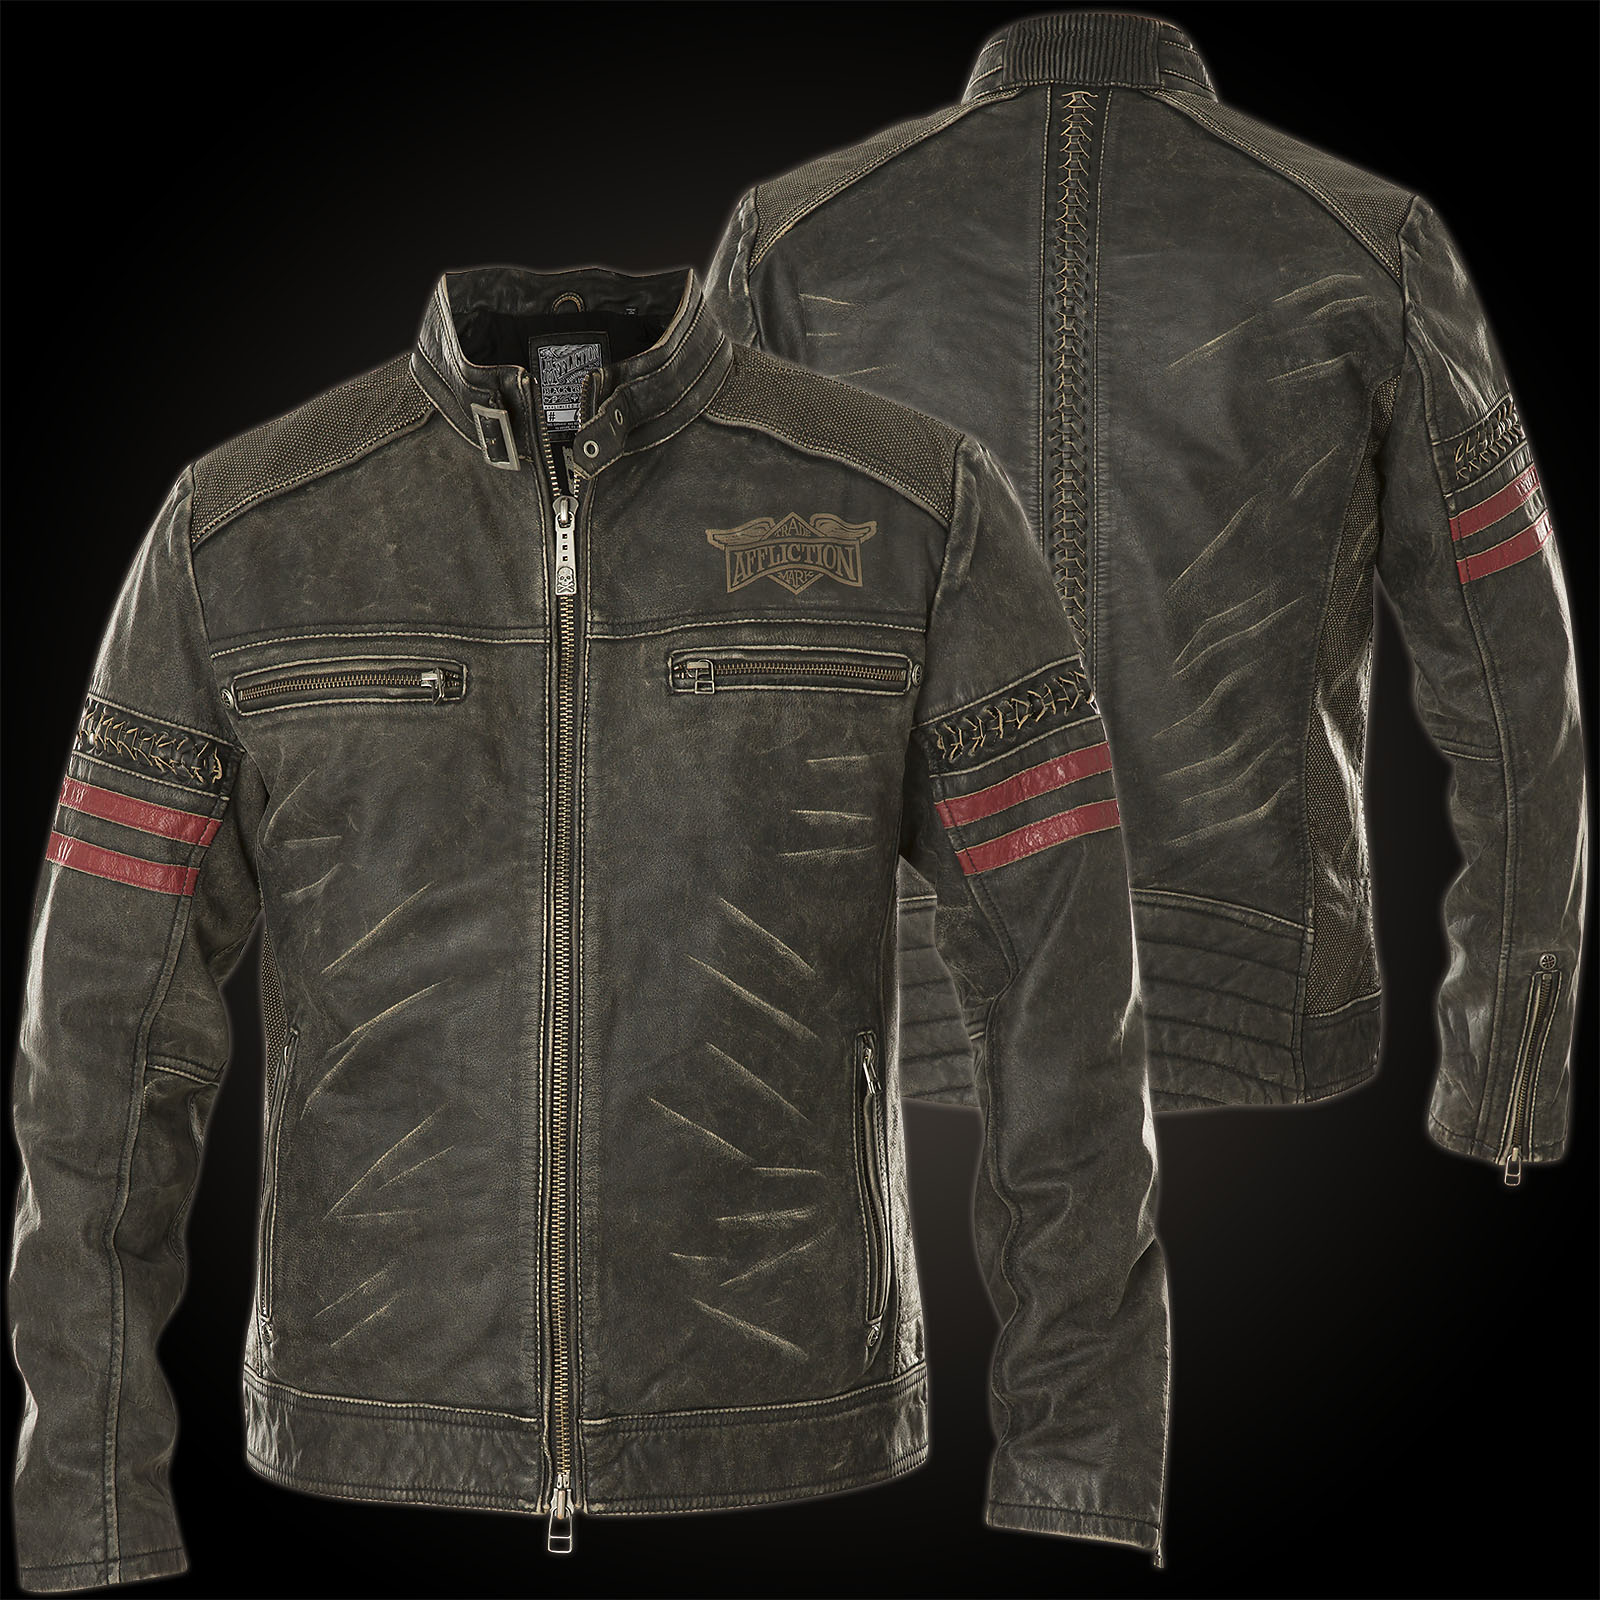 Affliction Born To Race Jacket in biker style made from genuine leather